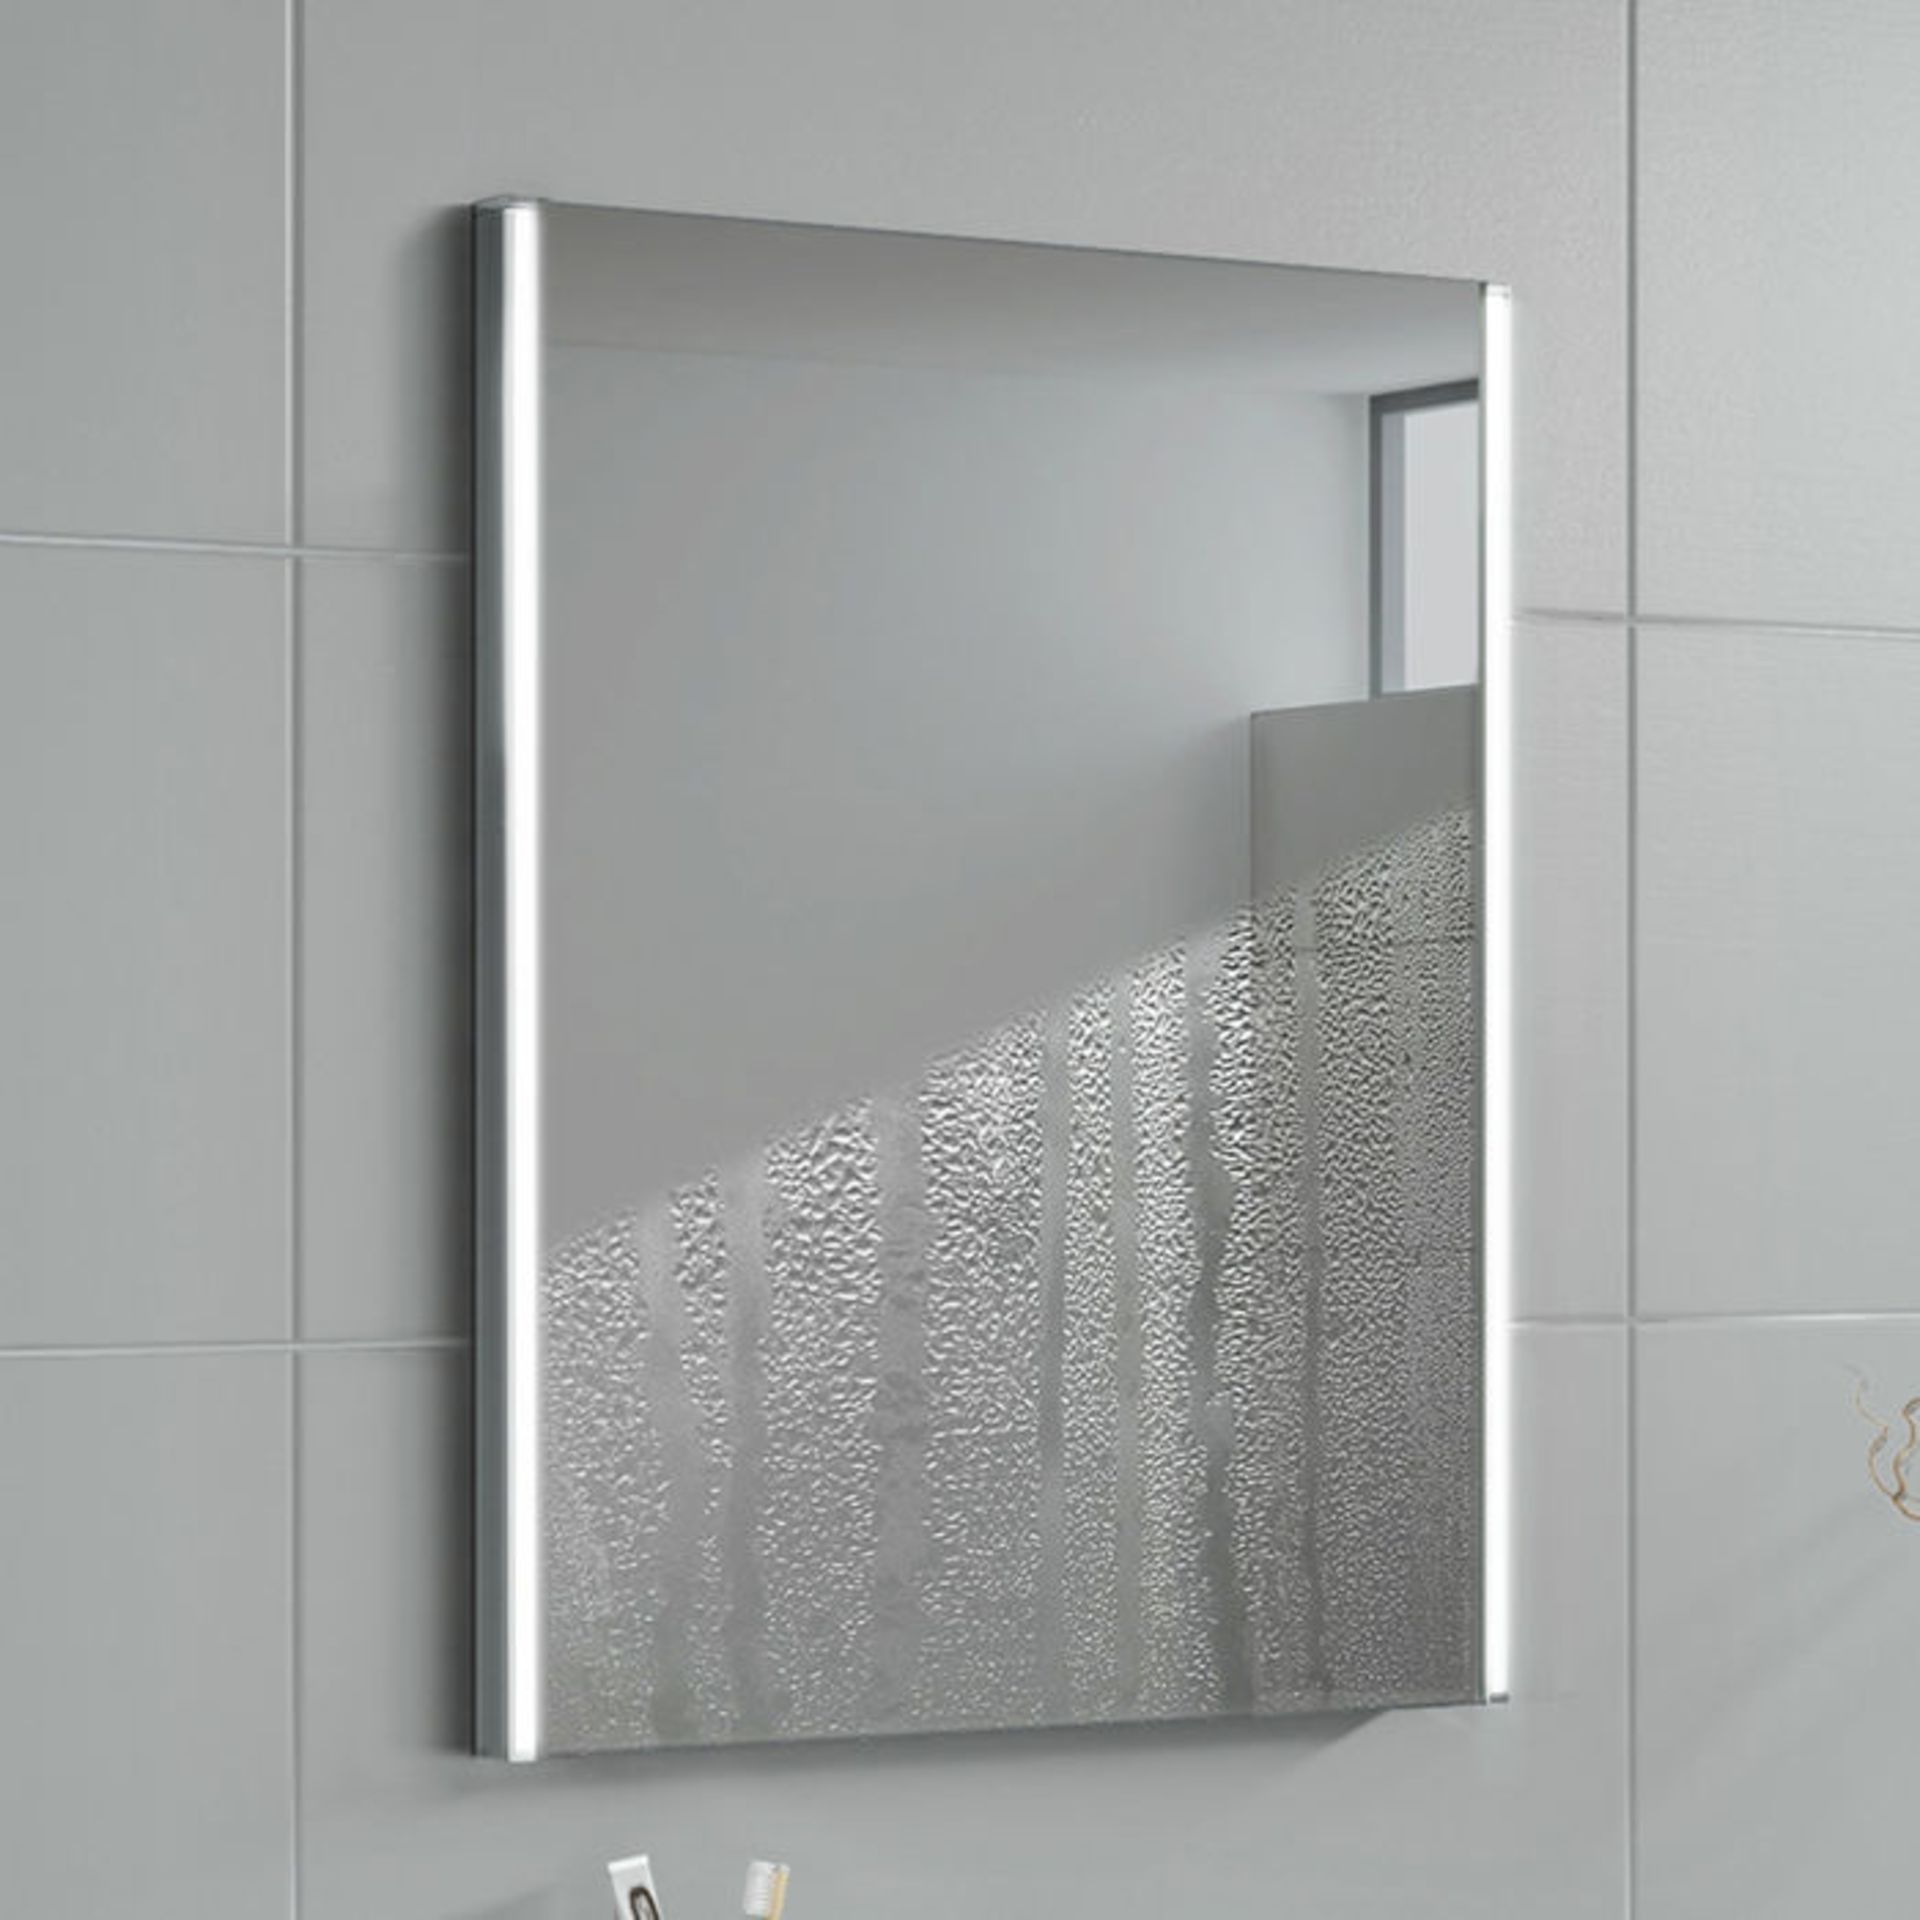 (L206) 450x600mm Lunar Illuminated LED Mirror. RRP £324.99. Energy efficient LED lighting with - Image 2 of 3